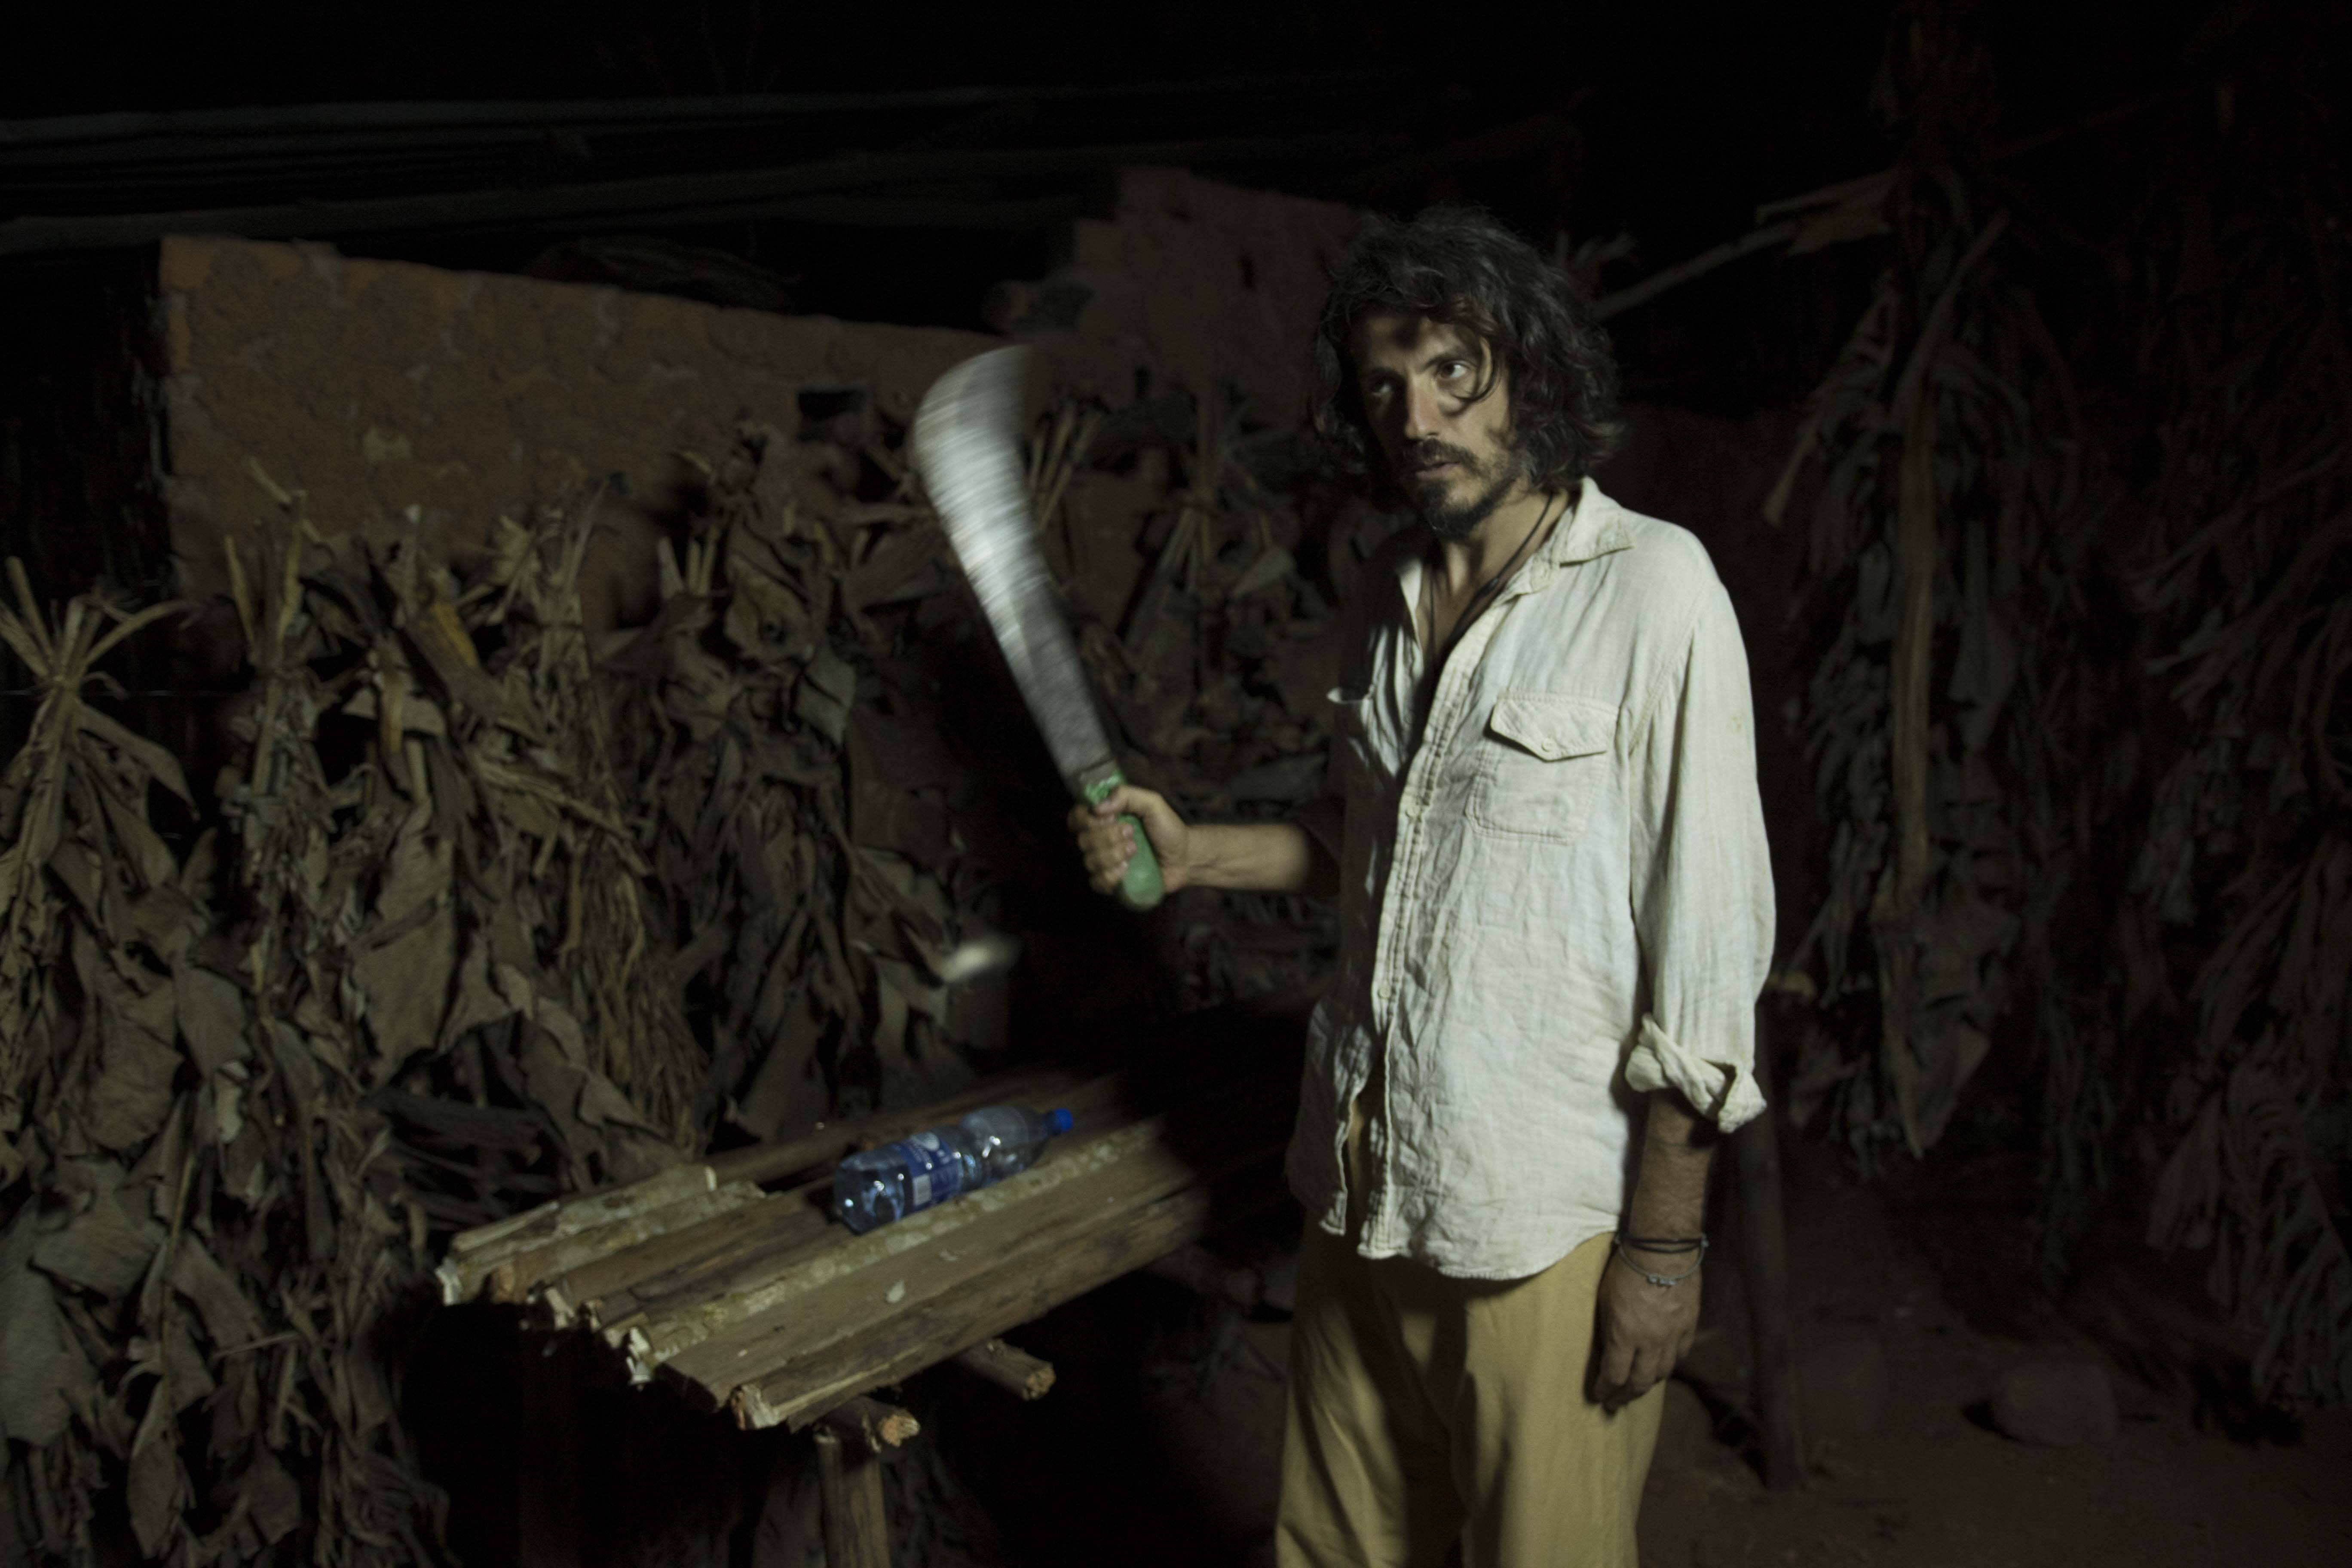 Still from Once Upon a Time in Uganda. A man stands in the dark, outside, near a table with a machete.